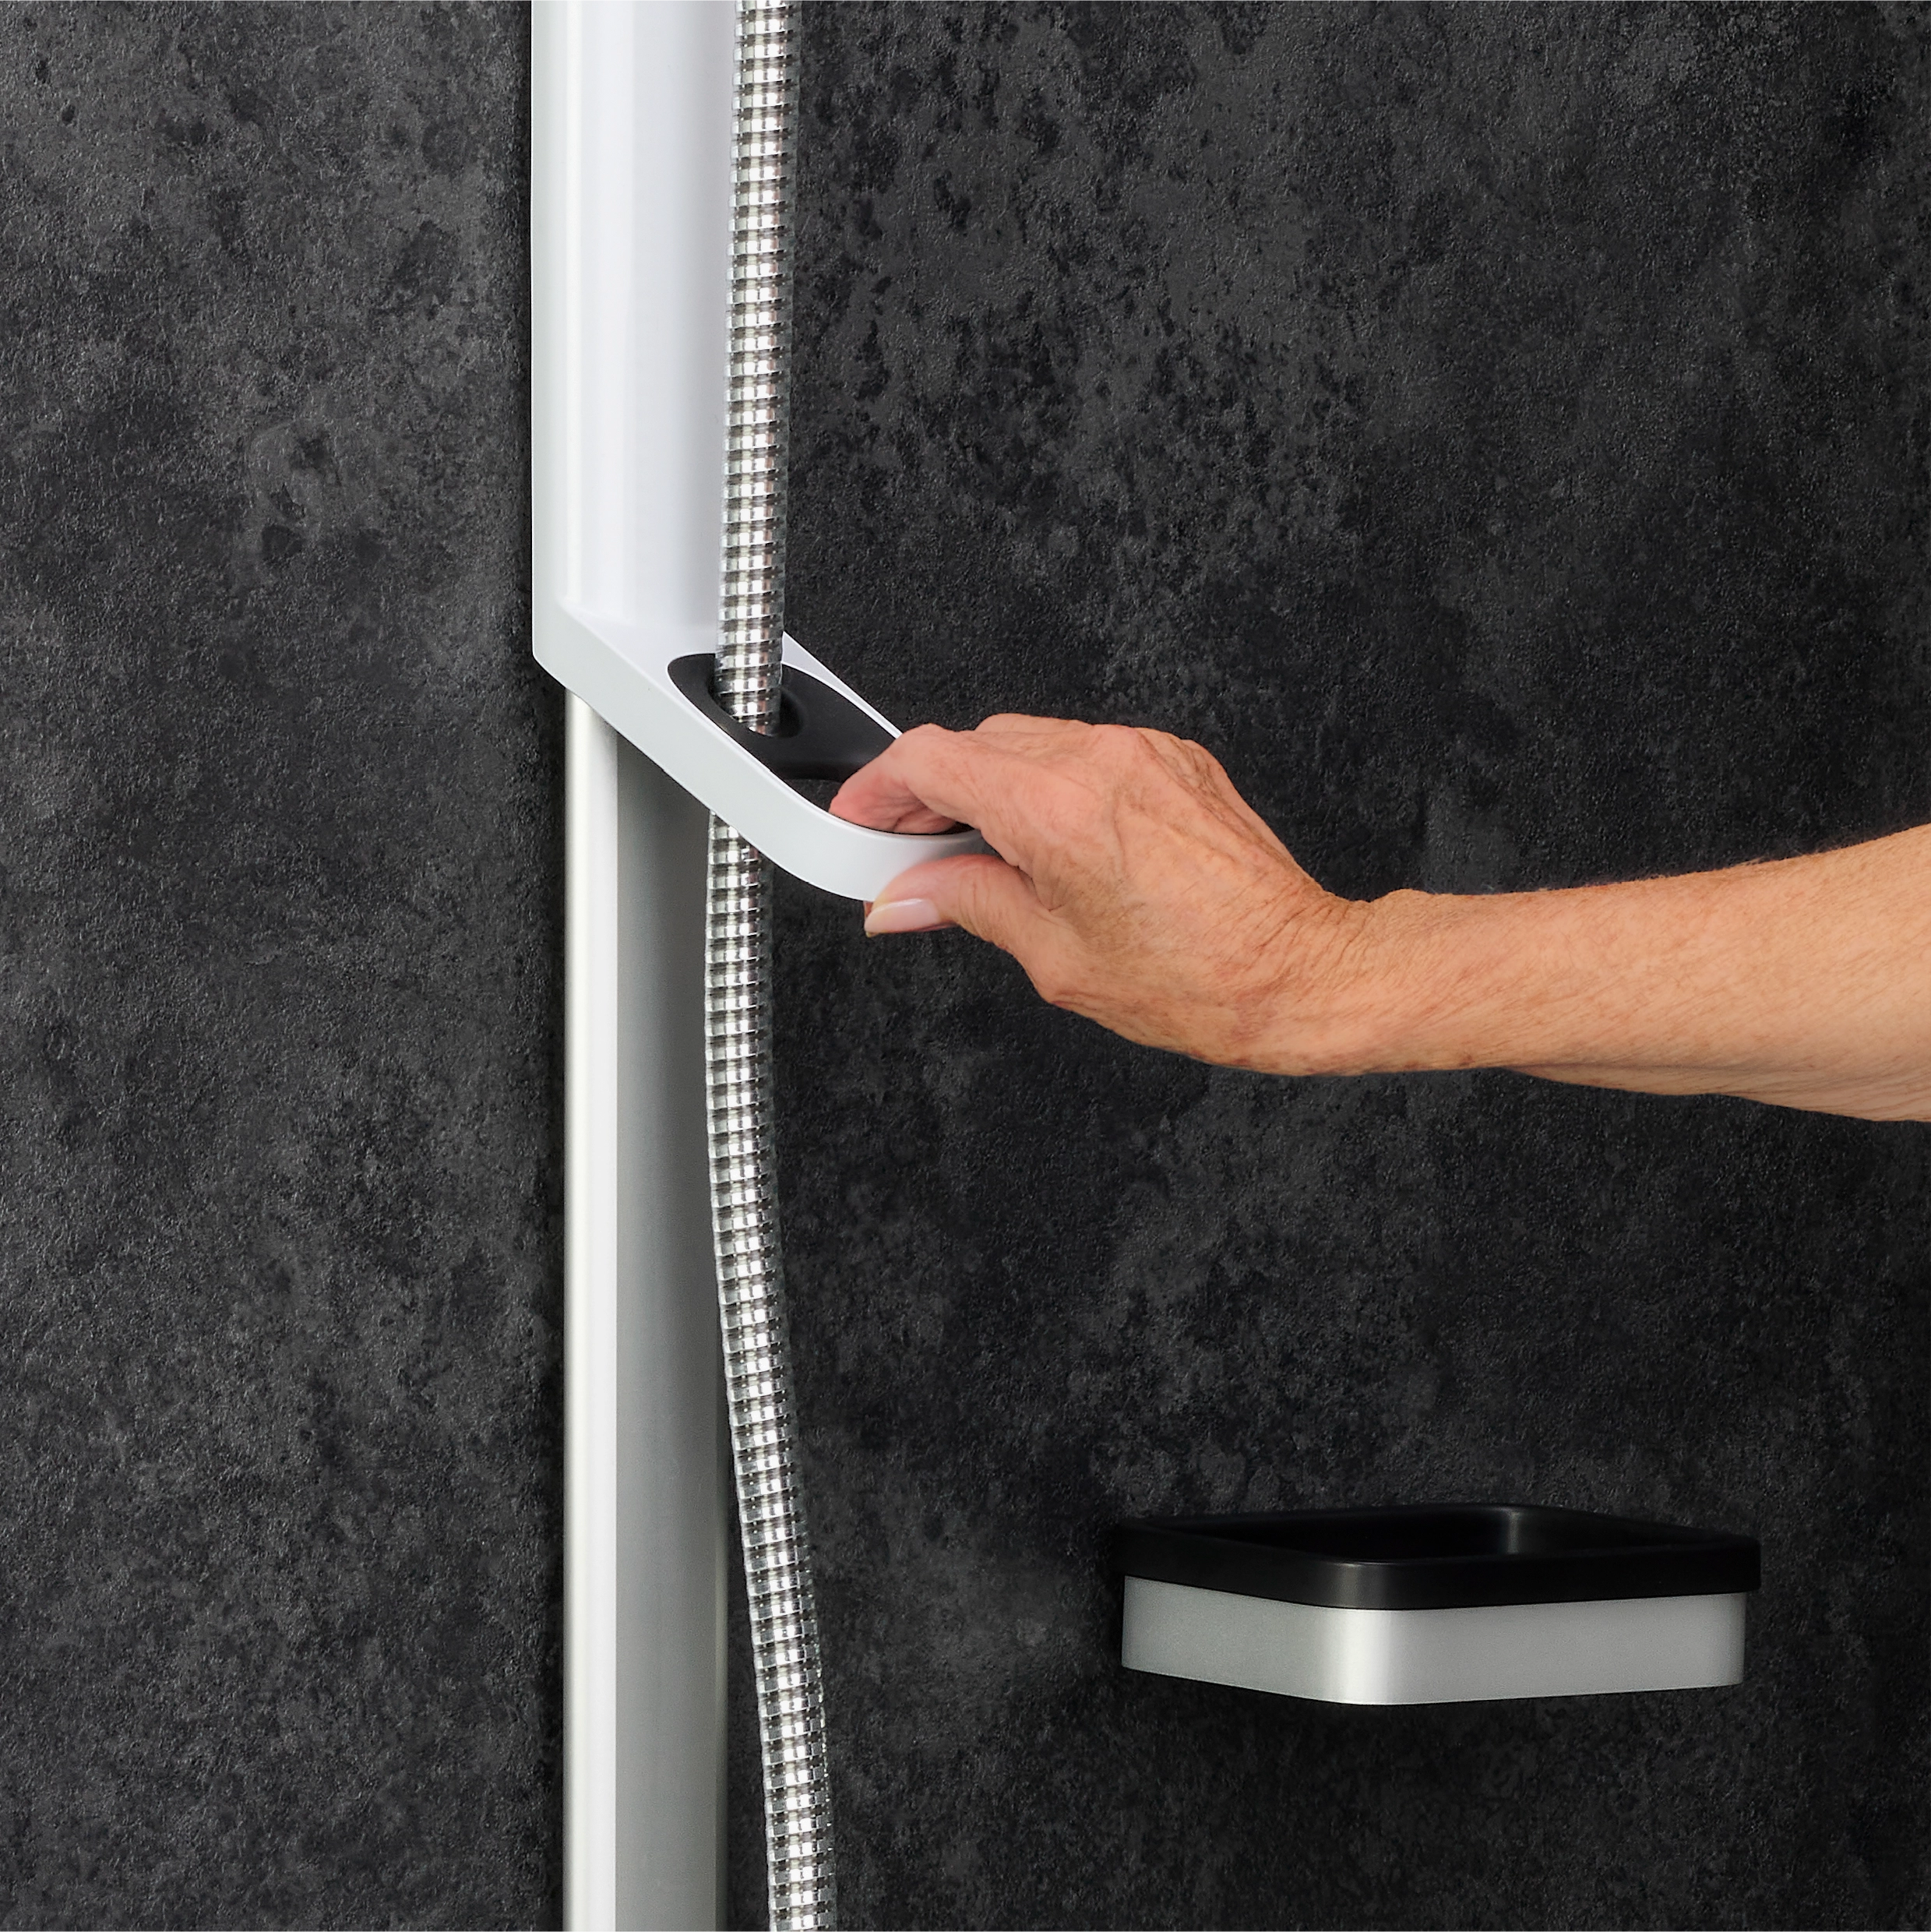 Mira Showers introduces new select flex: Pioneering inclusive design for an enhanced accessible shower experience